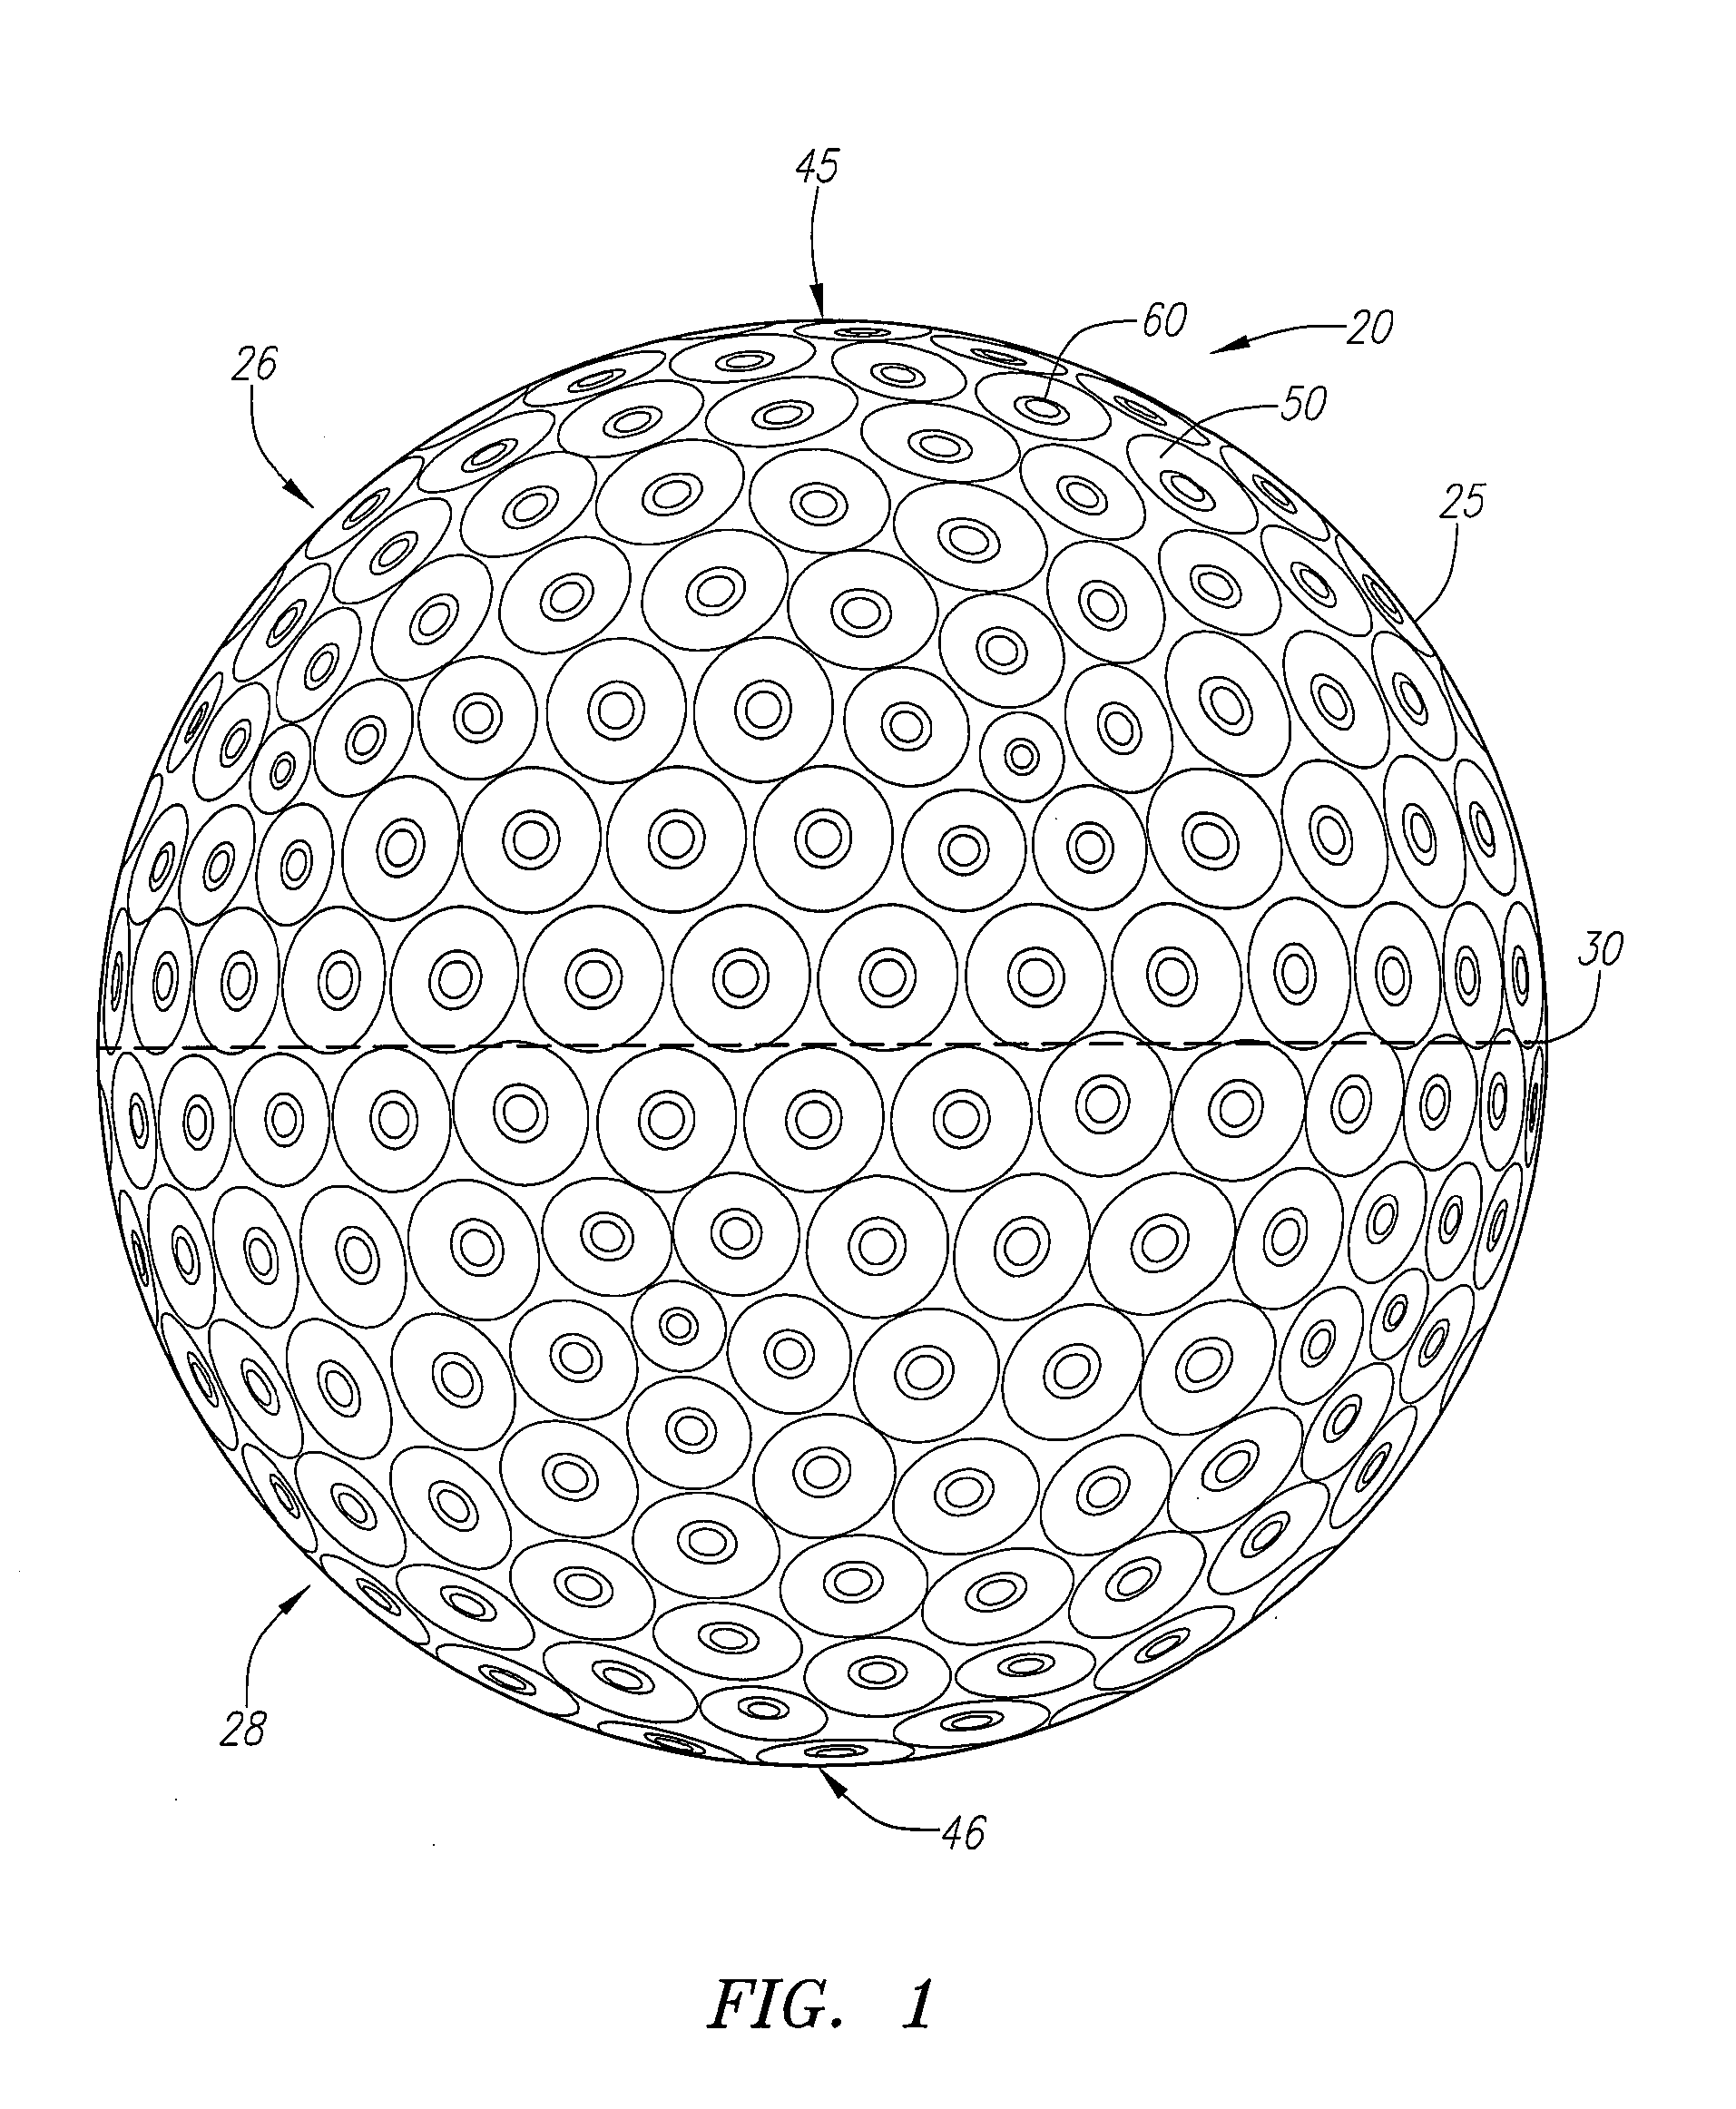 Dual dimple surface geometry for a golf ball